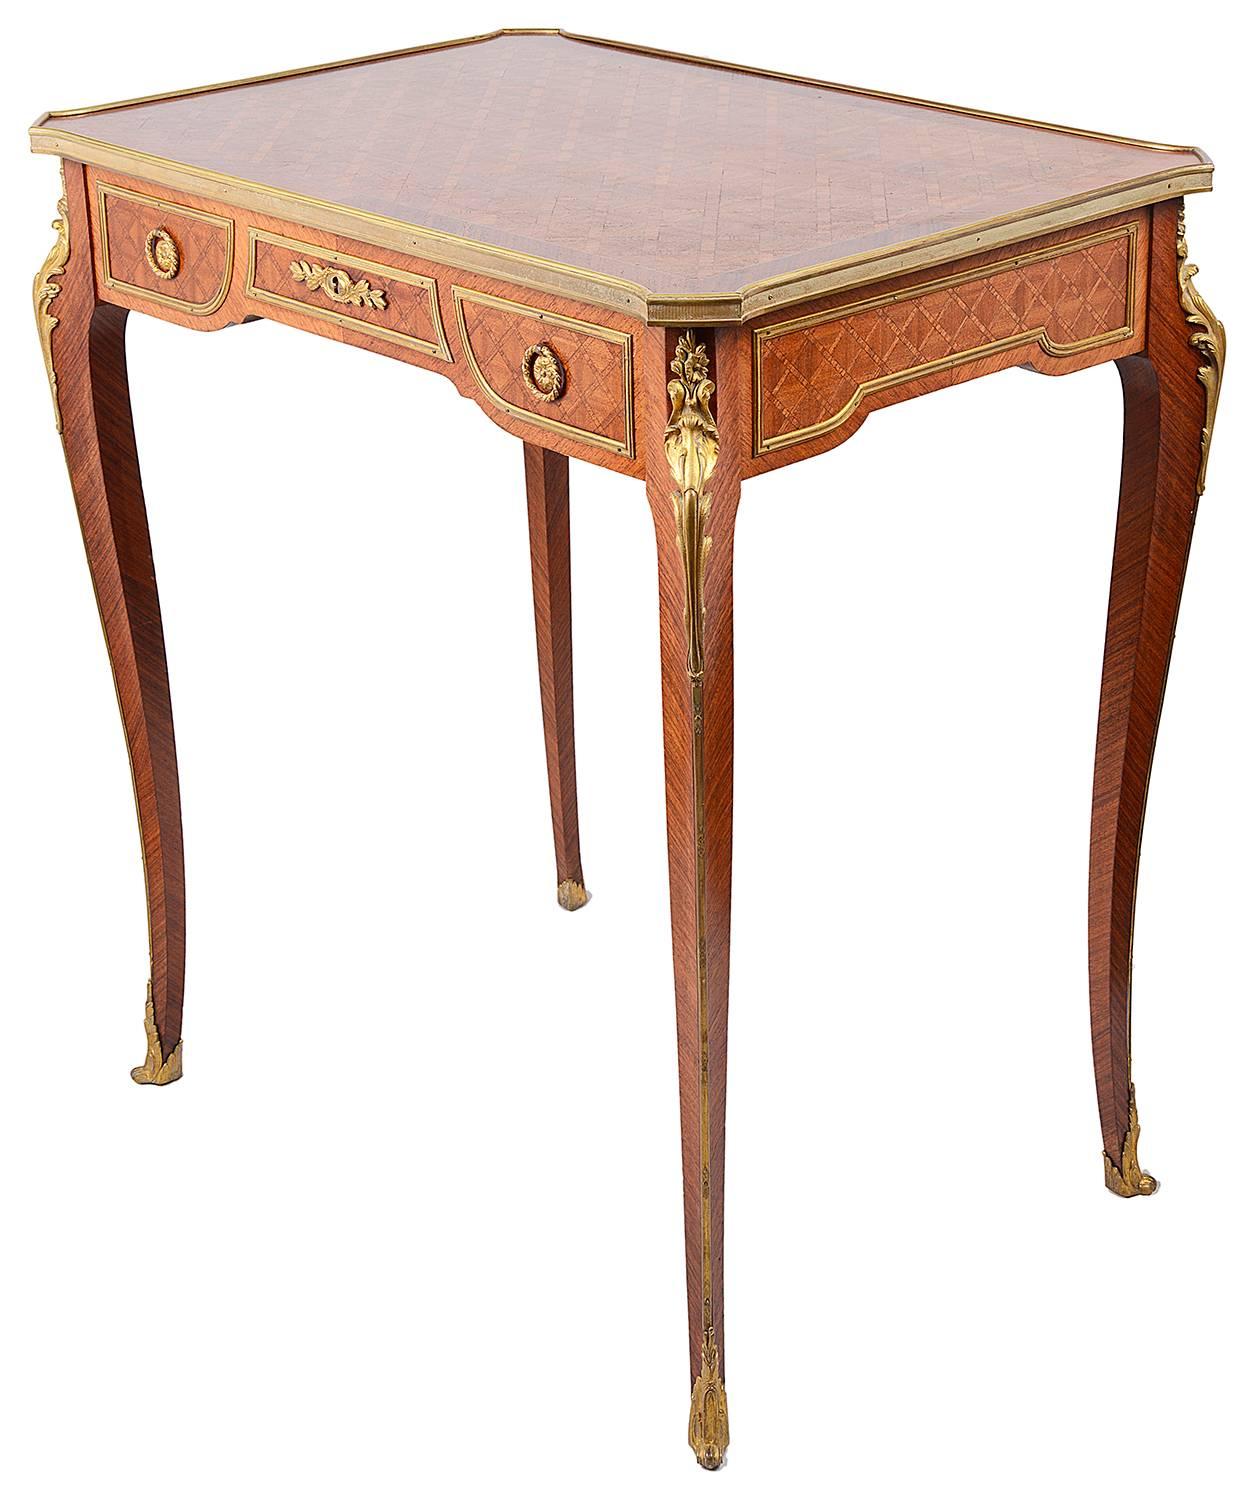 A good quality late 19th century French Kingwood parquetry inlaid Bureau plat. Having ormolu mounts, three mahogany lined frieze drawers and raised on elegant tapering legs.